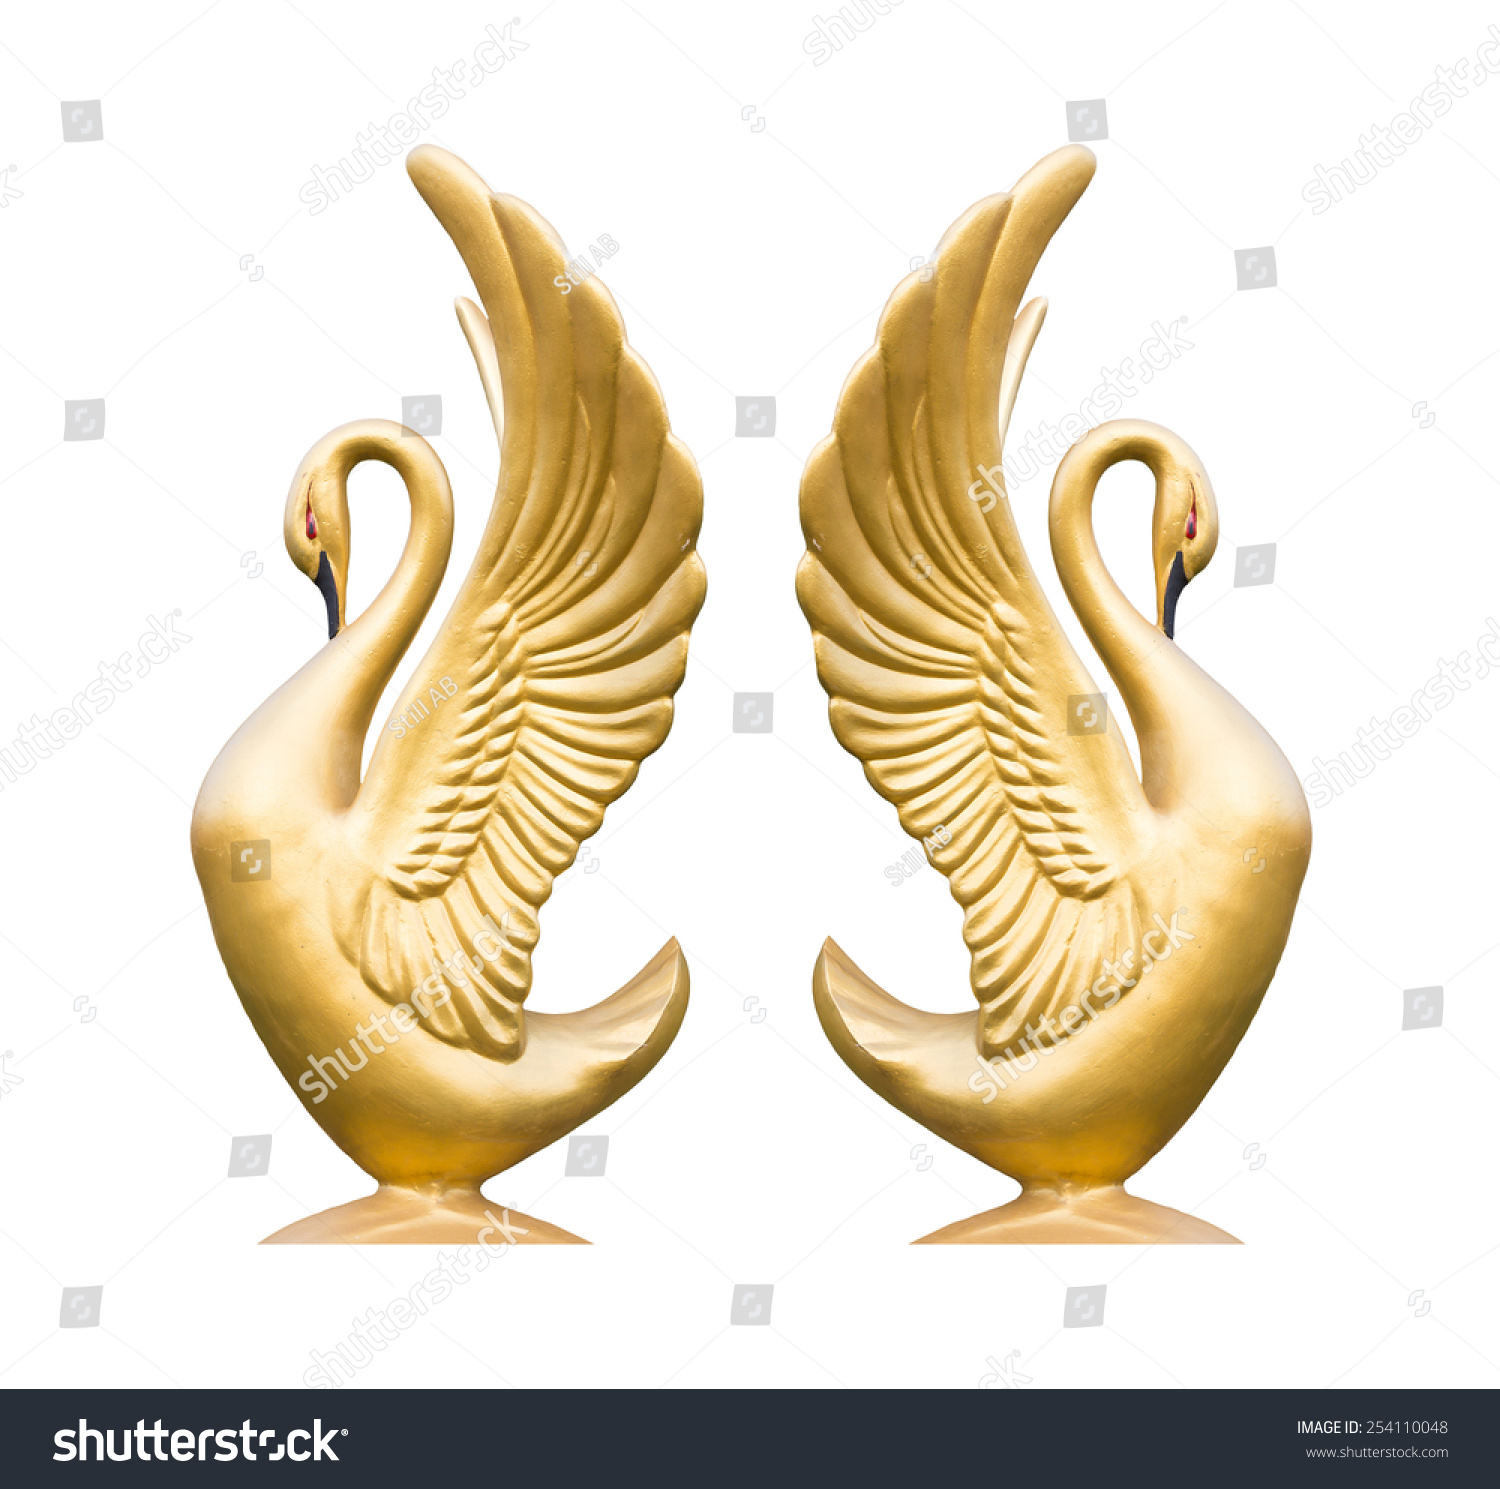 Golden Swan Sculpture On White Background Stock Photo (Royalty Free ...